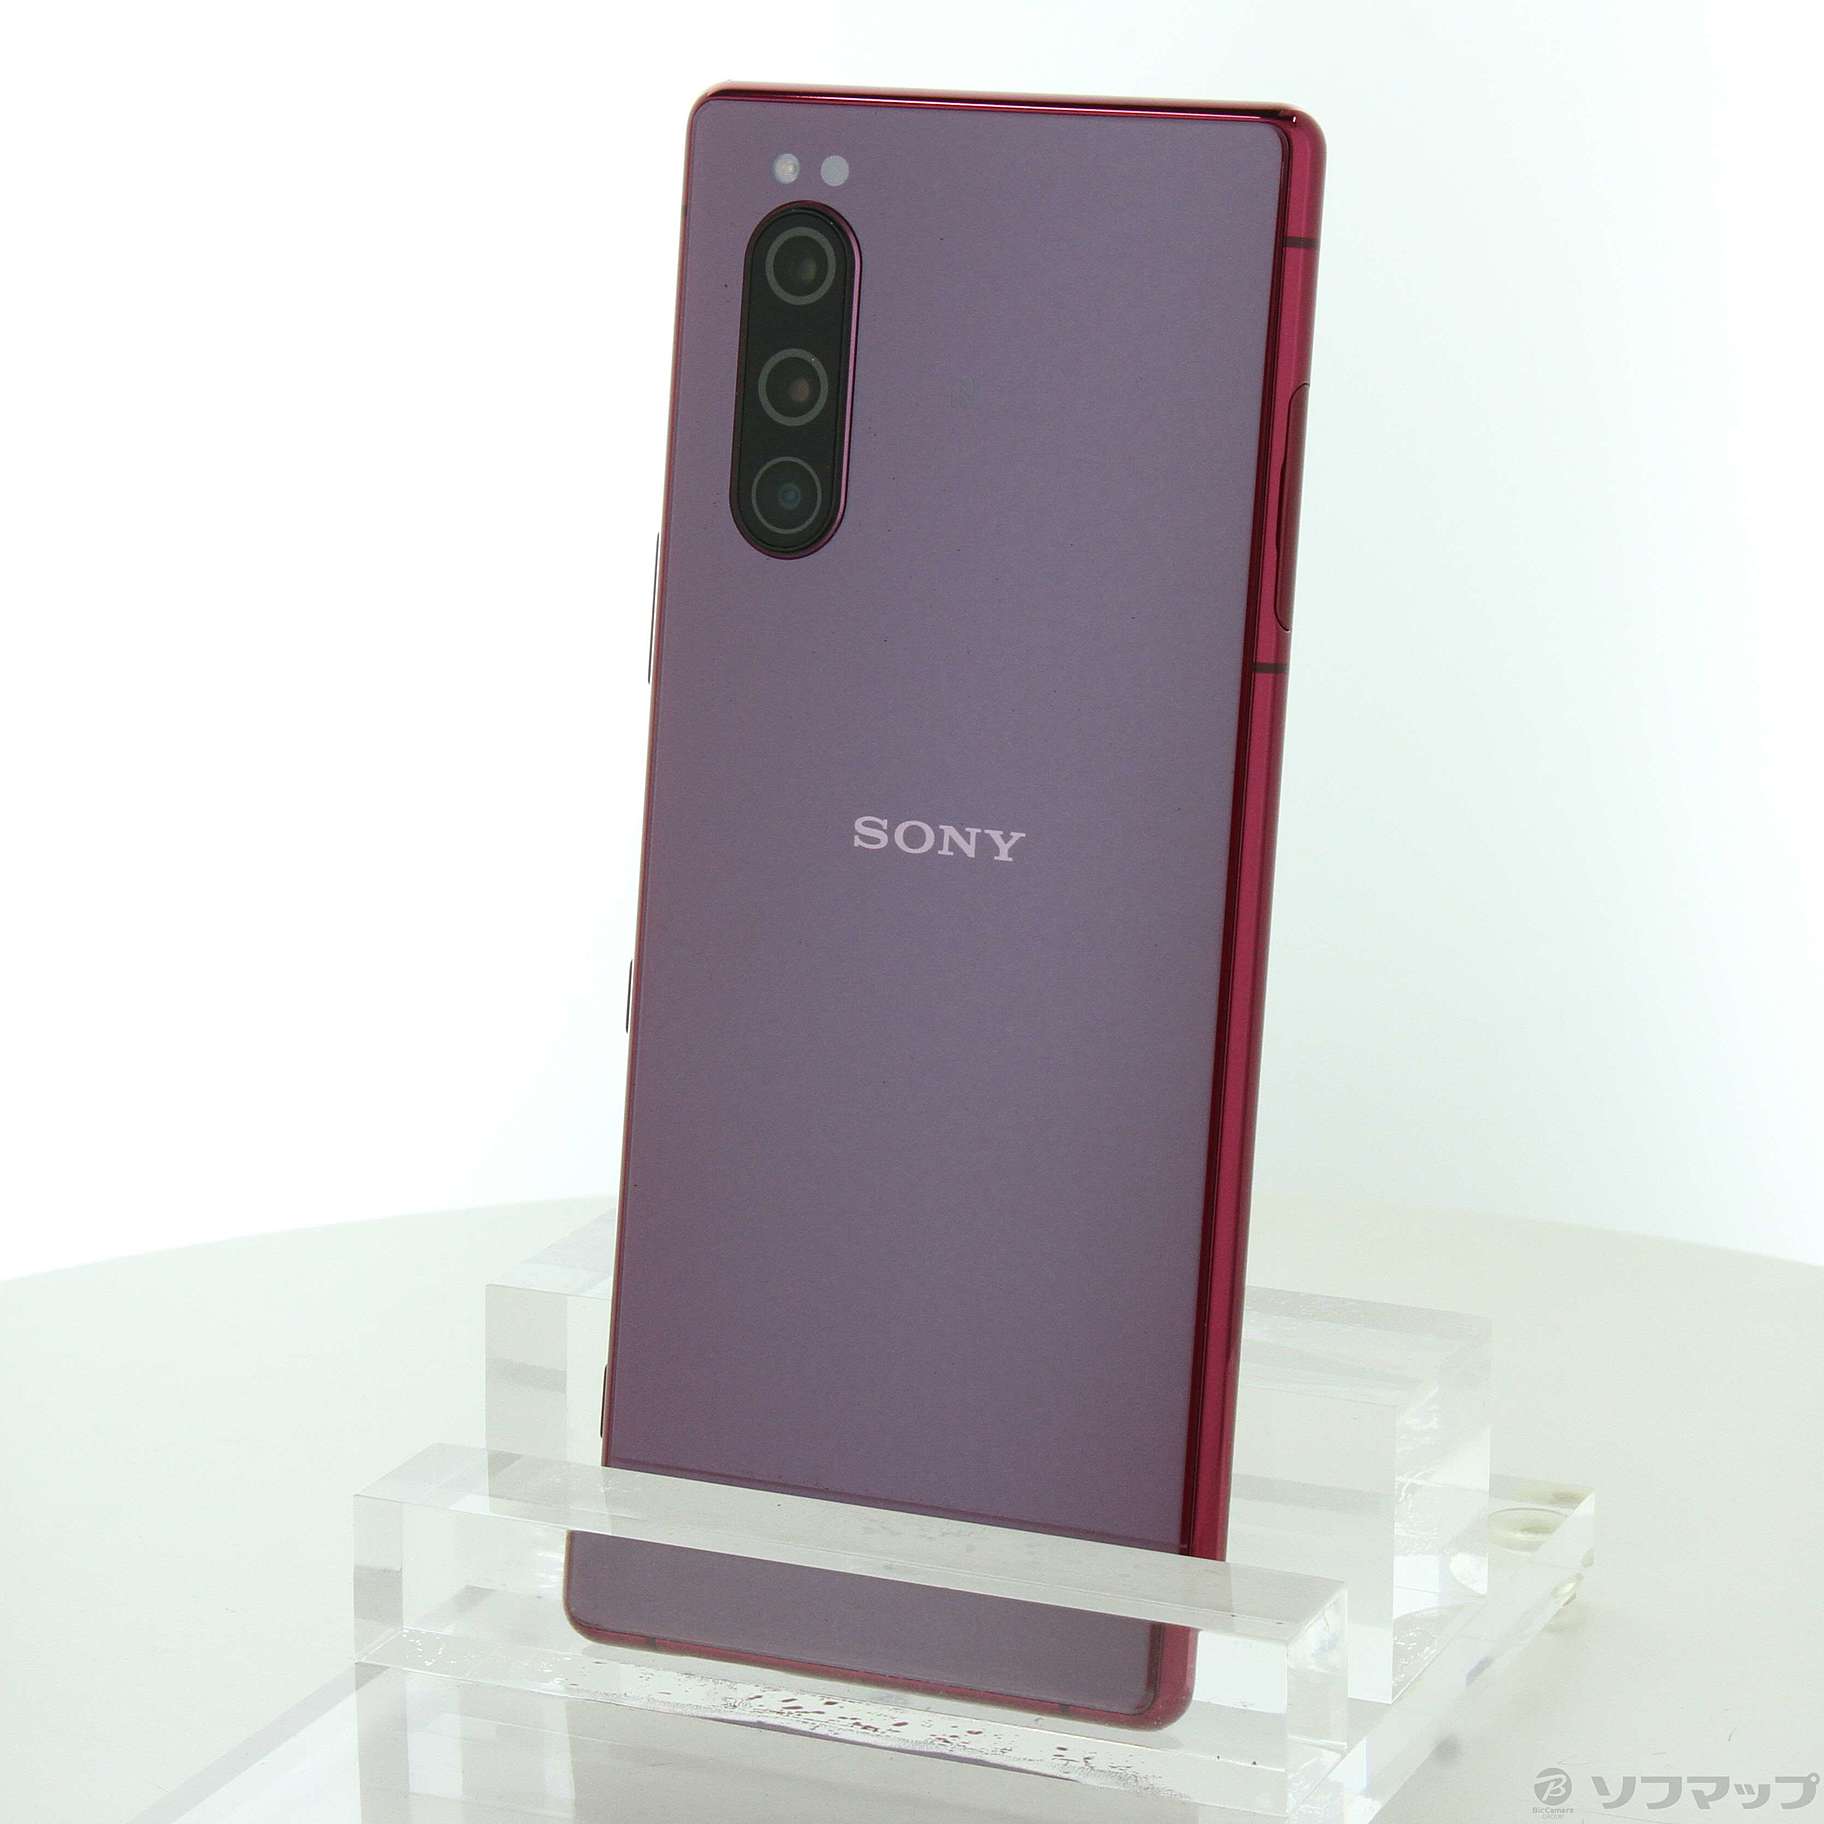 Android 10 美品 901SO SONY Xperia 5 SIMフリー-